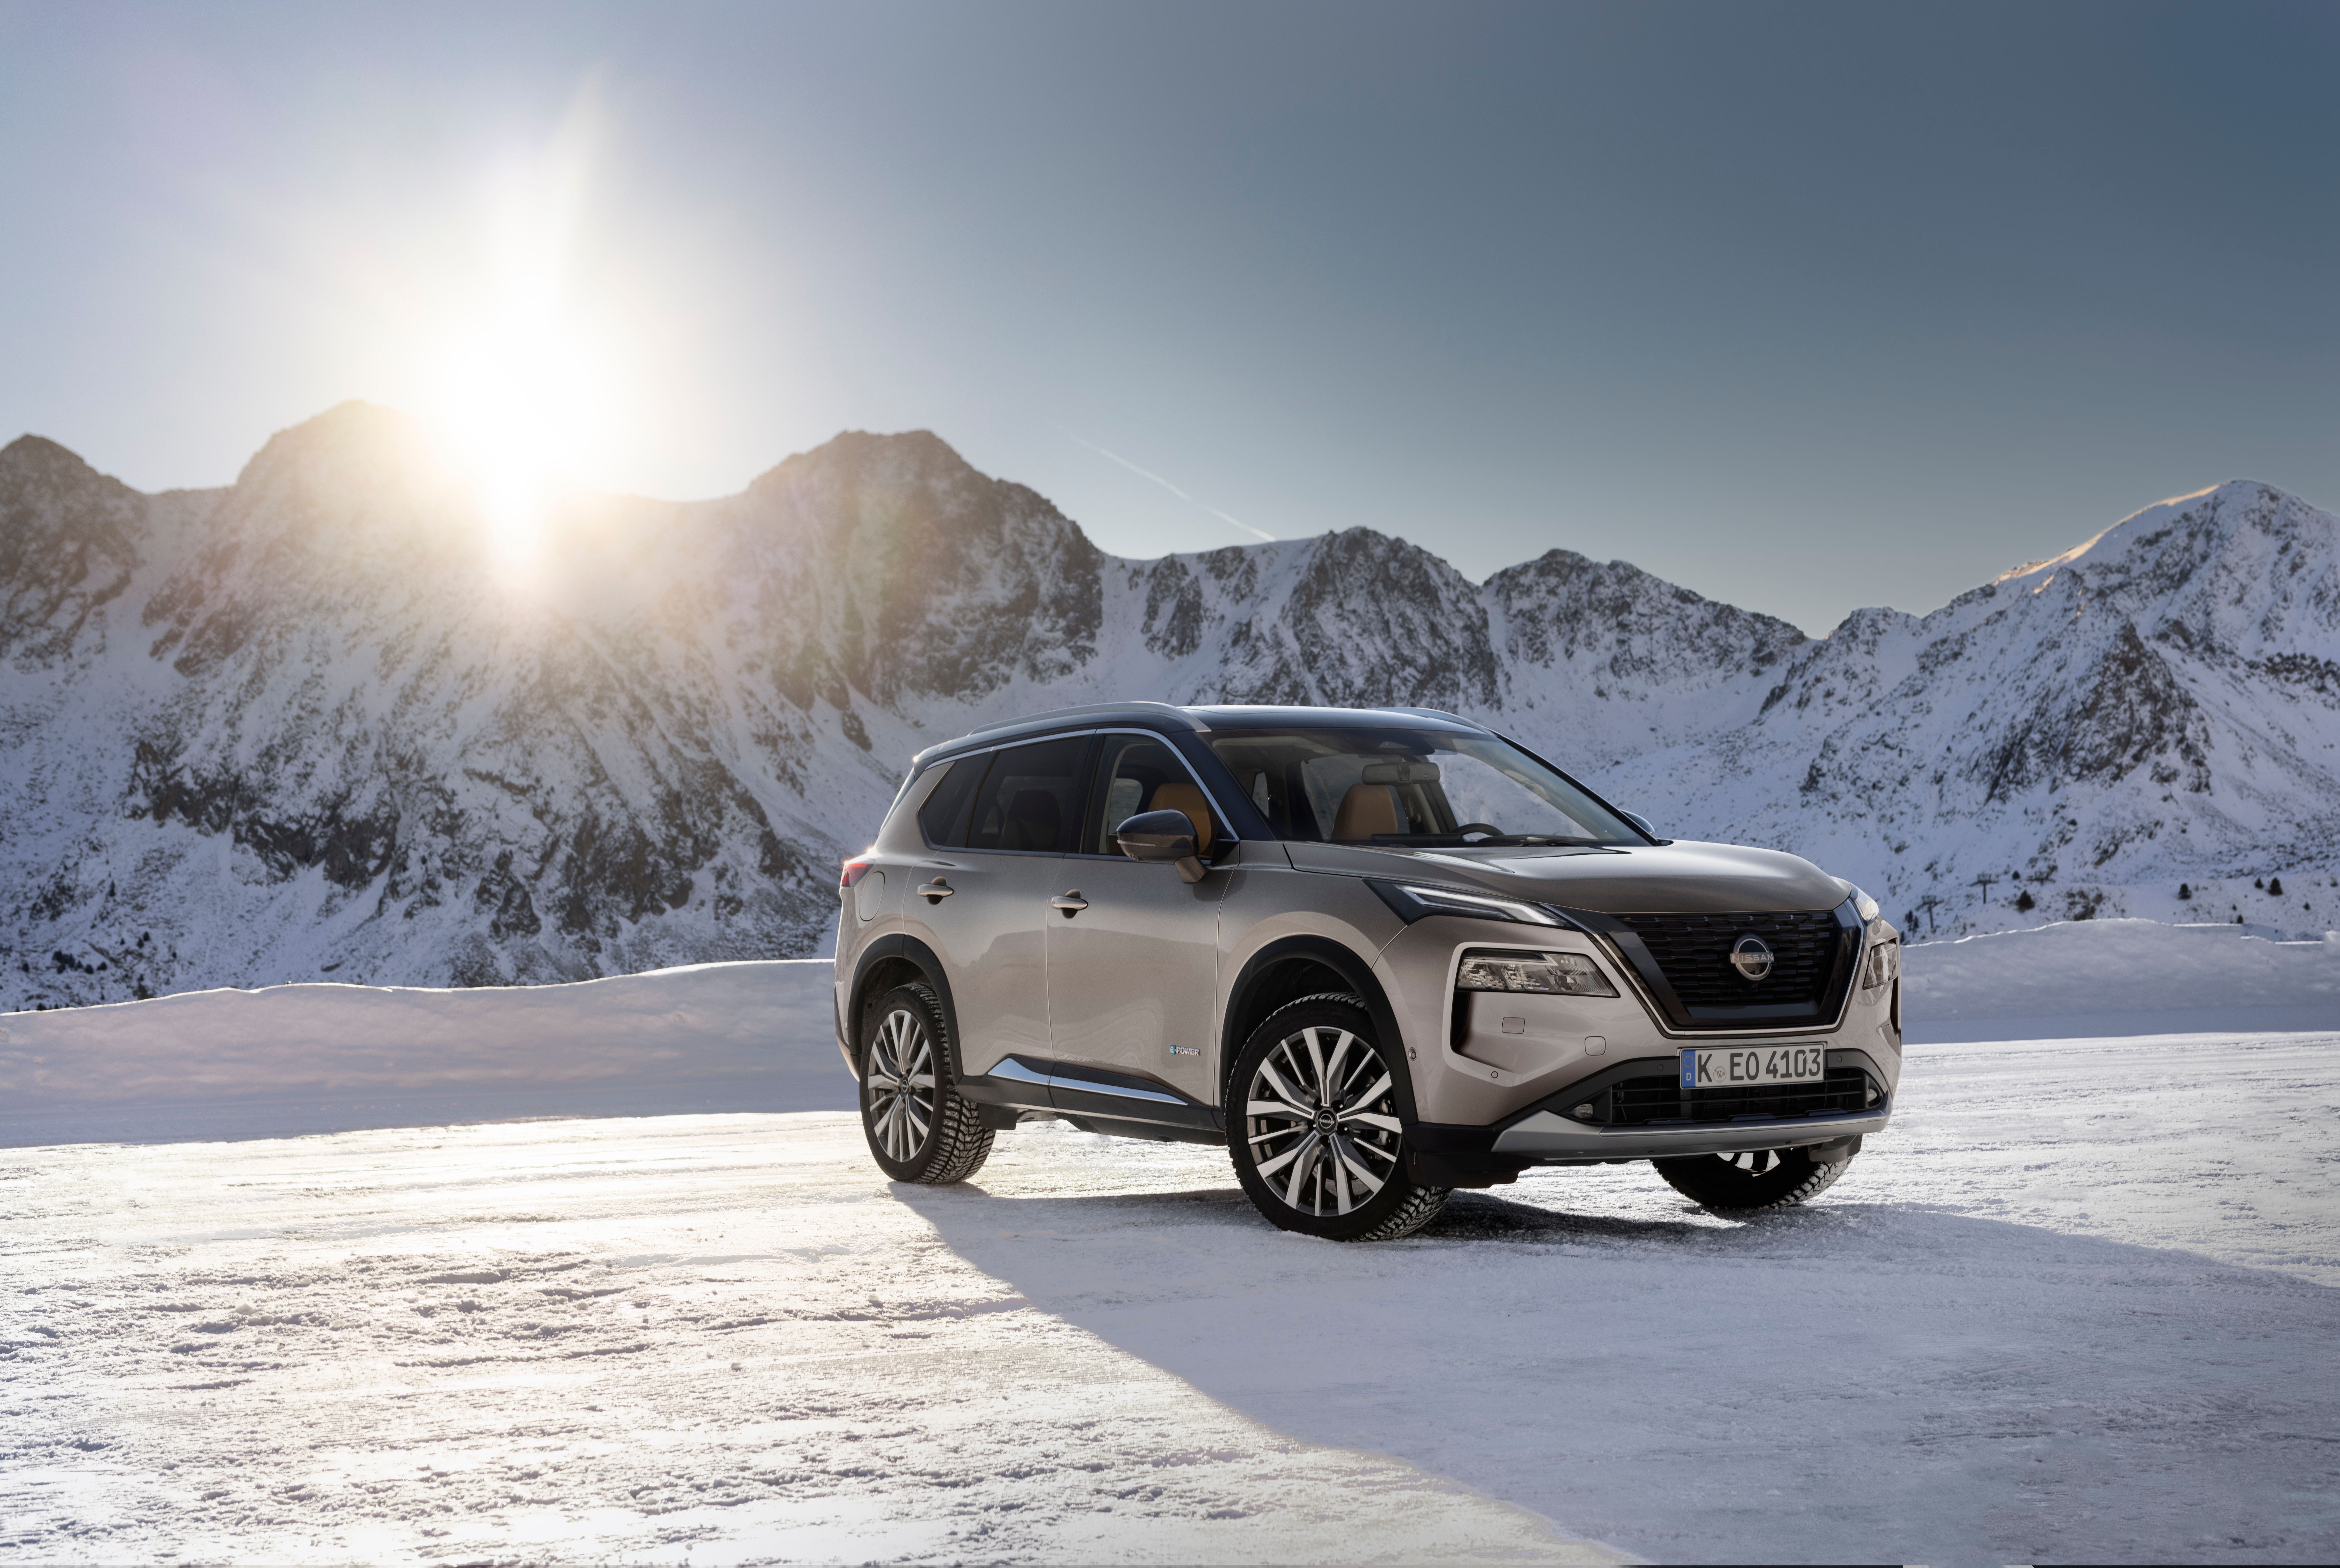 Nissan e-4ORCE touches ground in Europe to take on the harshest winter conditions with superior control